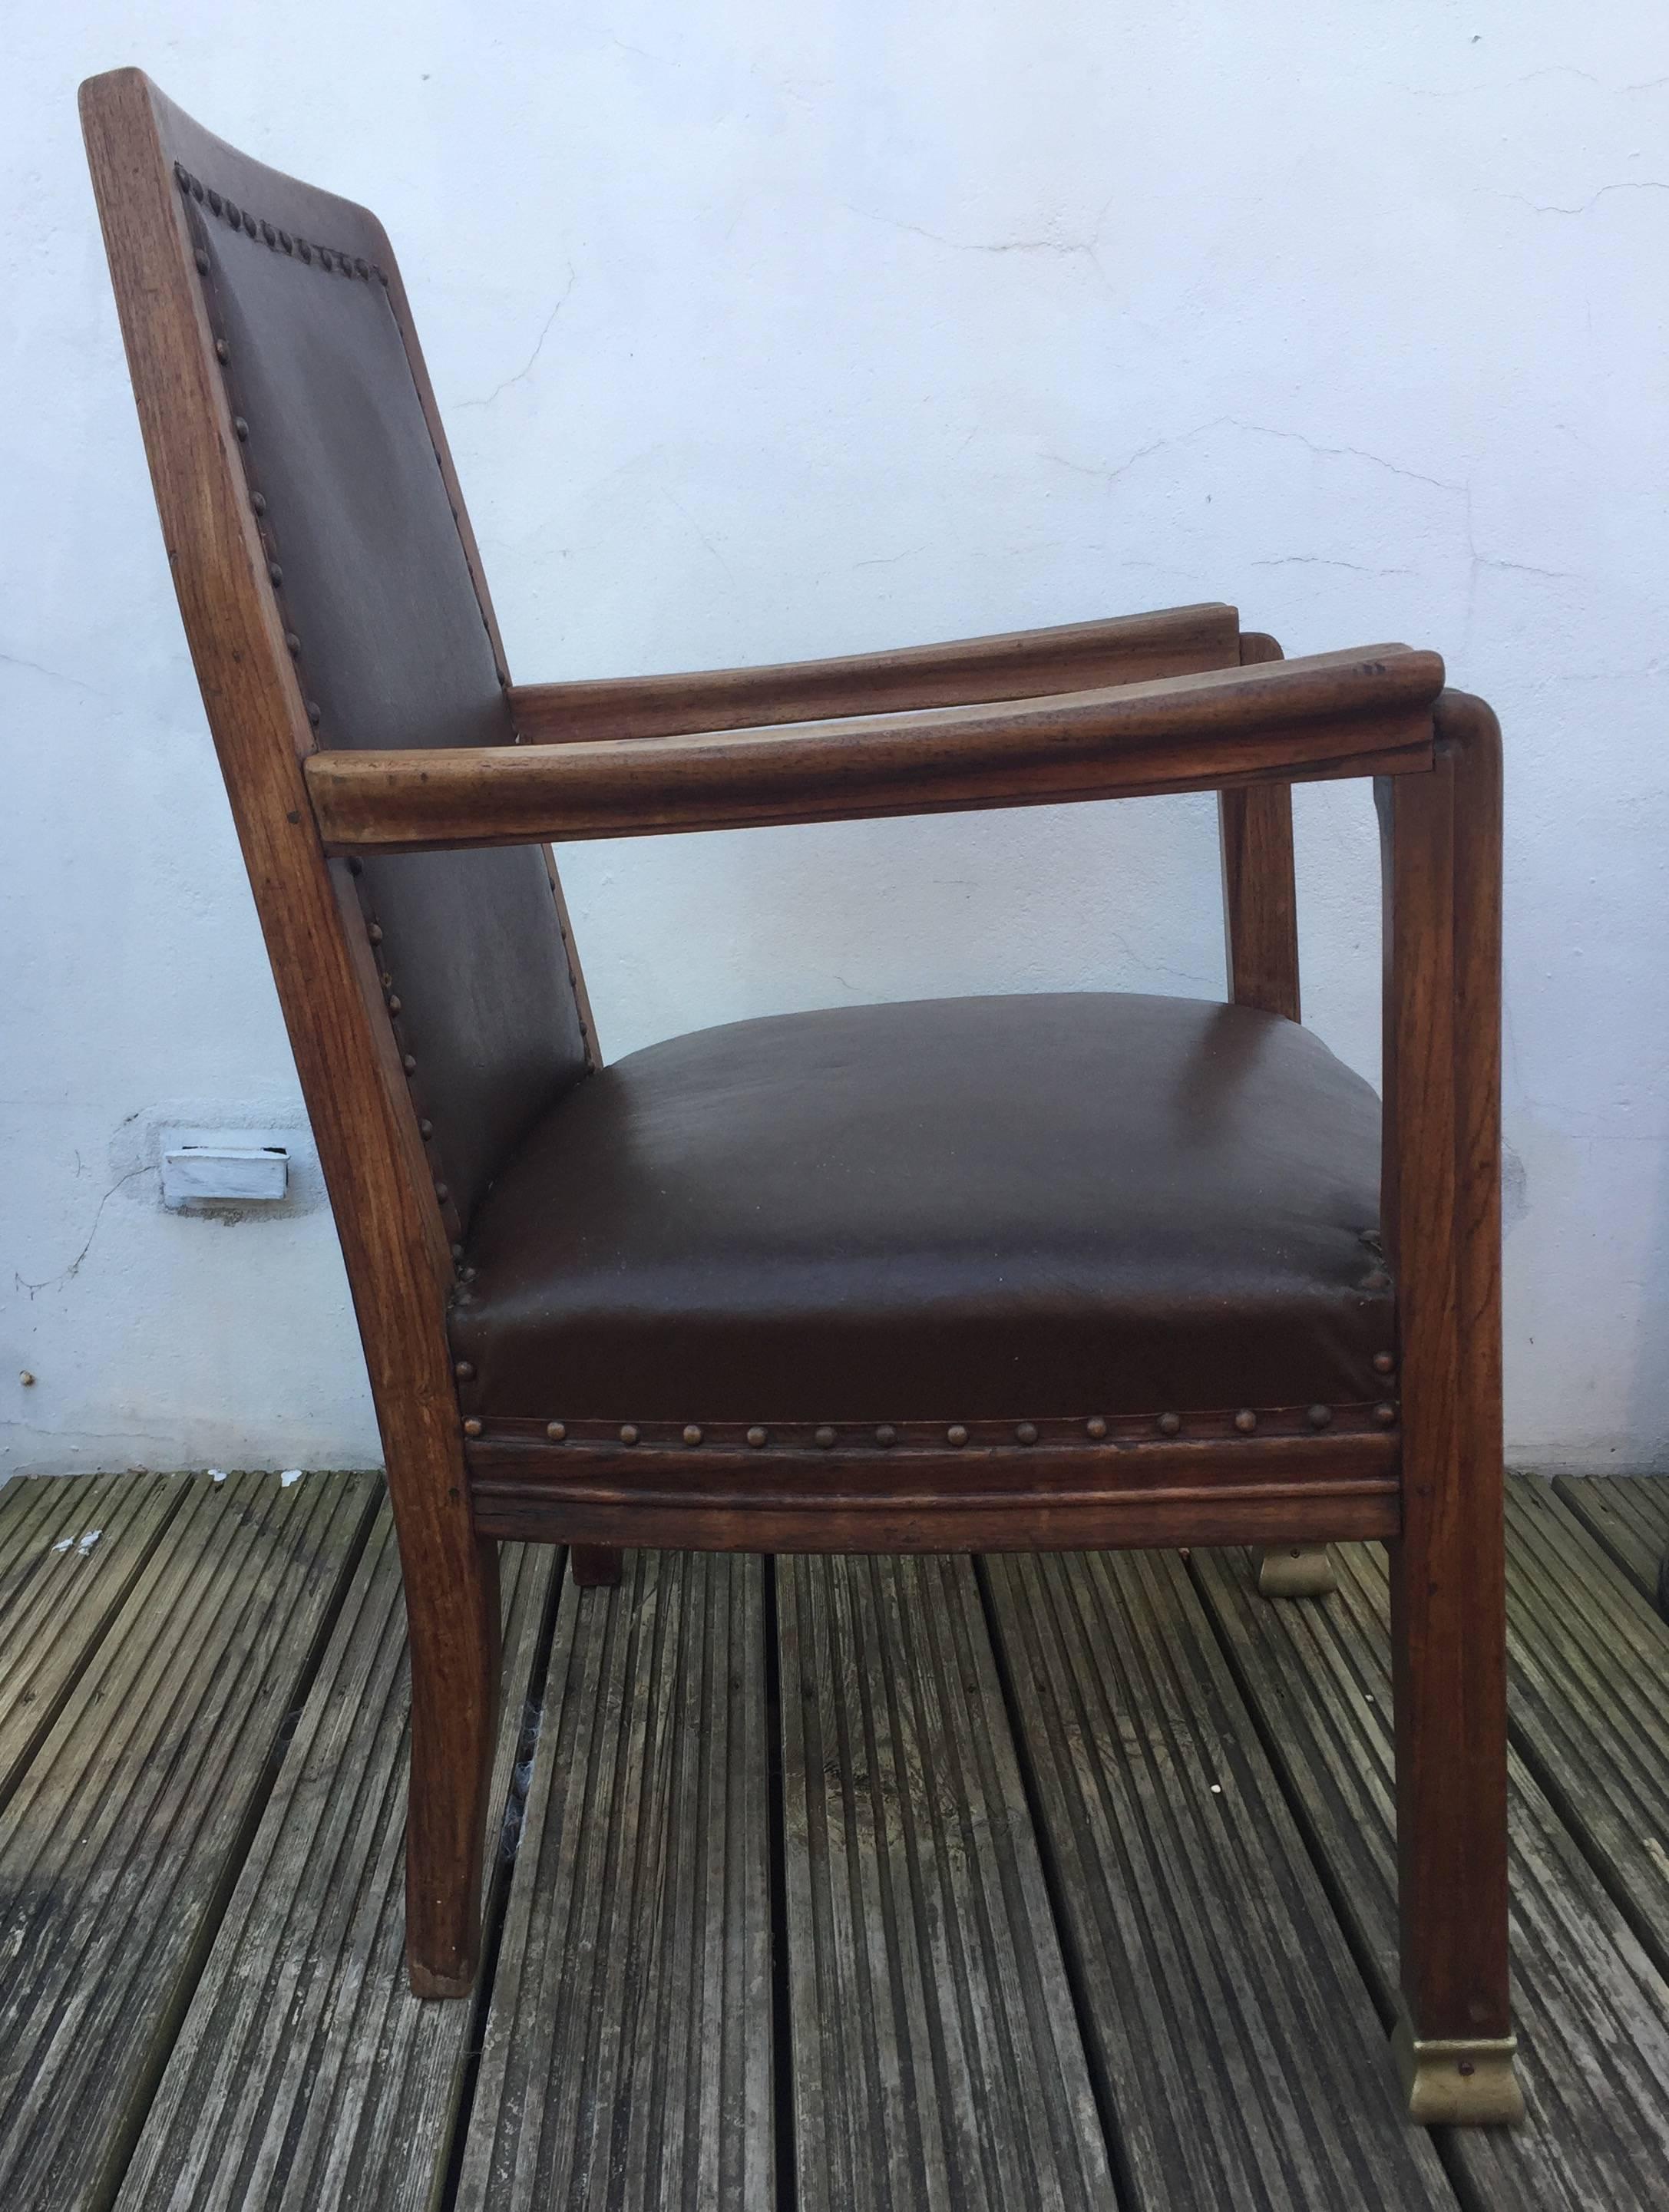 Heavy and high quality solid walnut lounge chair with later reupholstering dating to circa 1910 in the manner of Henri Van de Velde. The shallow carved details and ergonomic shaping of the arms signal a far higher level of design quality than